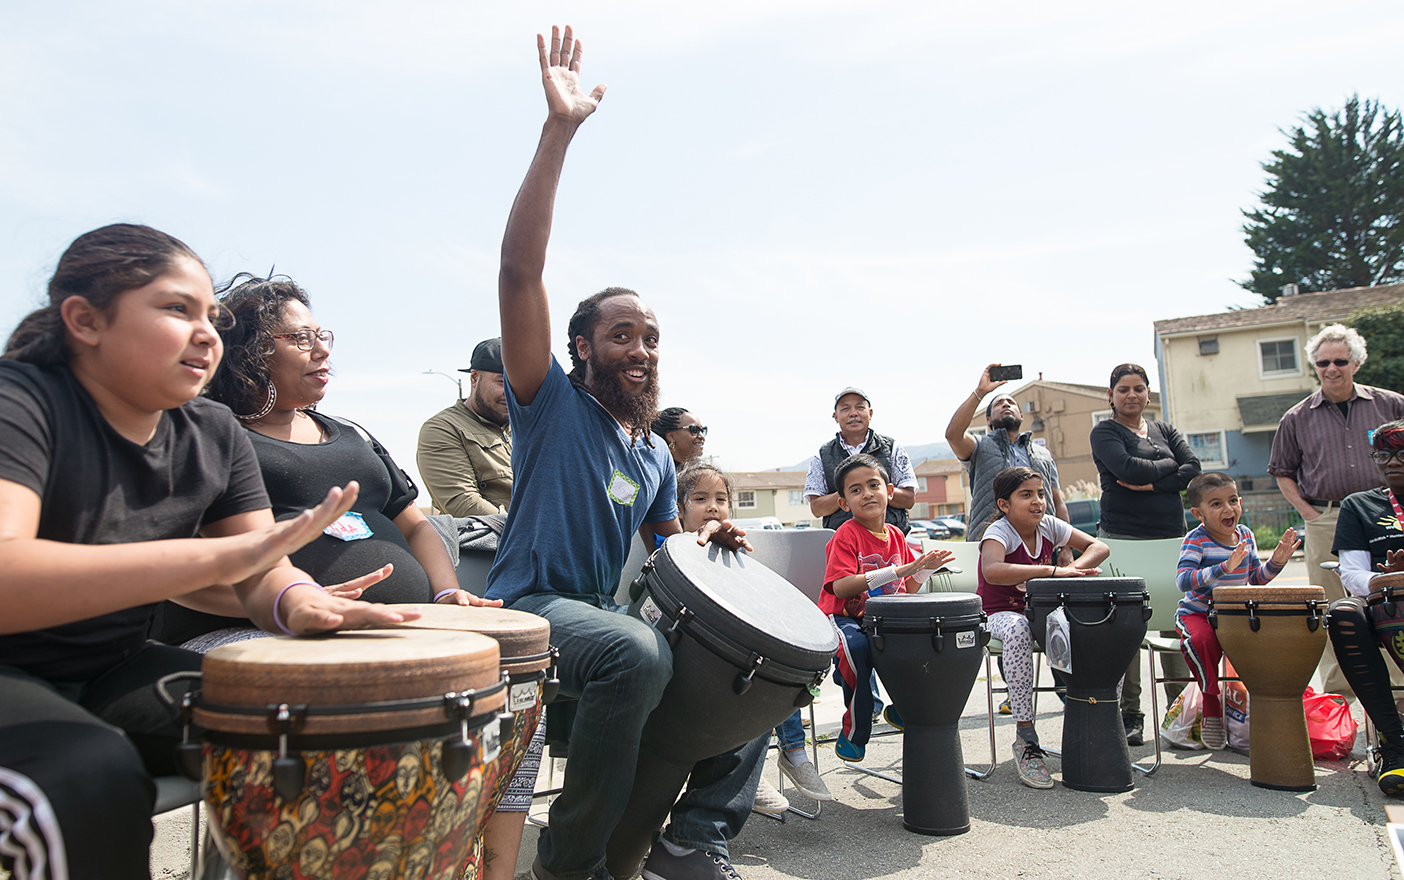 A picture of members of the San Francisco community playing djembe drums outside.